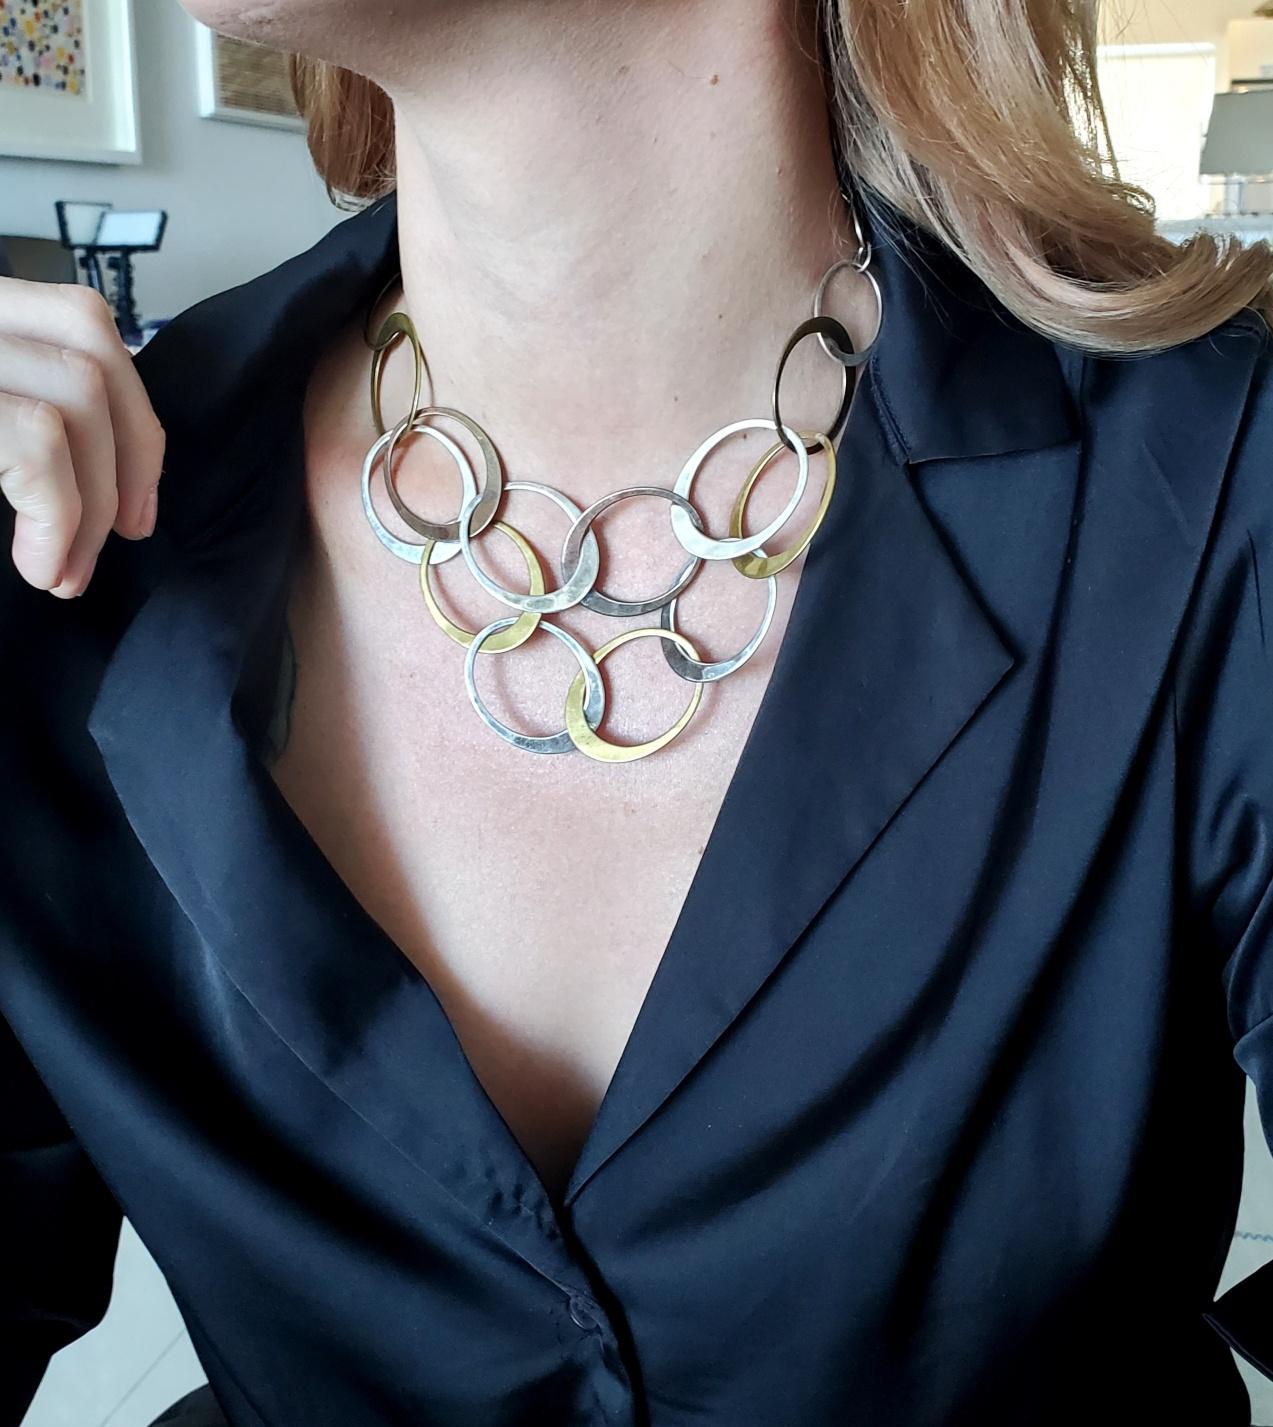 A tri color links necklace designed by Robert Lee Morris.

Beautiful modernist necklace, created at the studio of Robert Lee Morris, back in the 1970's. This geometric necklace has been crafted with diverse oval elements of different sizes